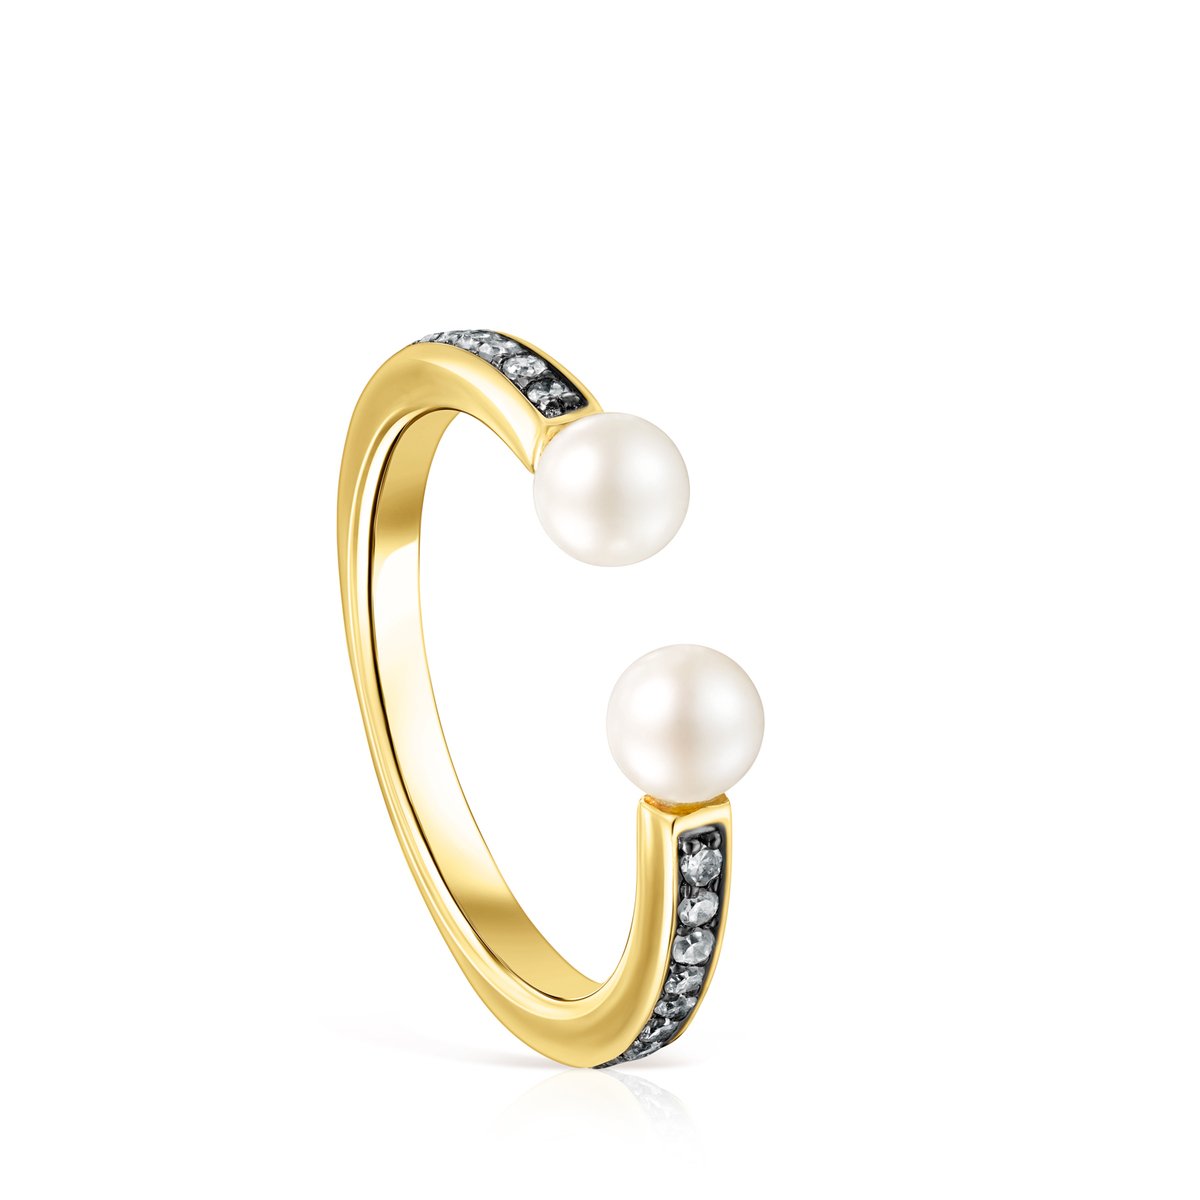 Tous Nocturne Ring in Gold Vermeil with Diamonds and Pearls 918445510